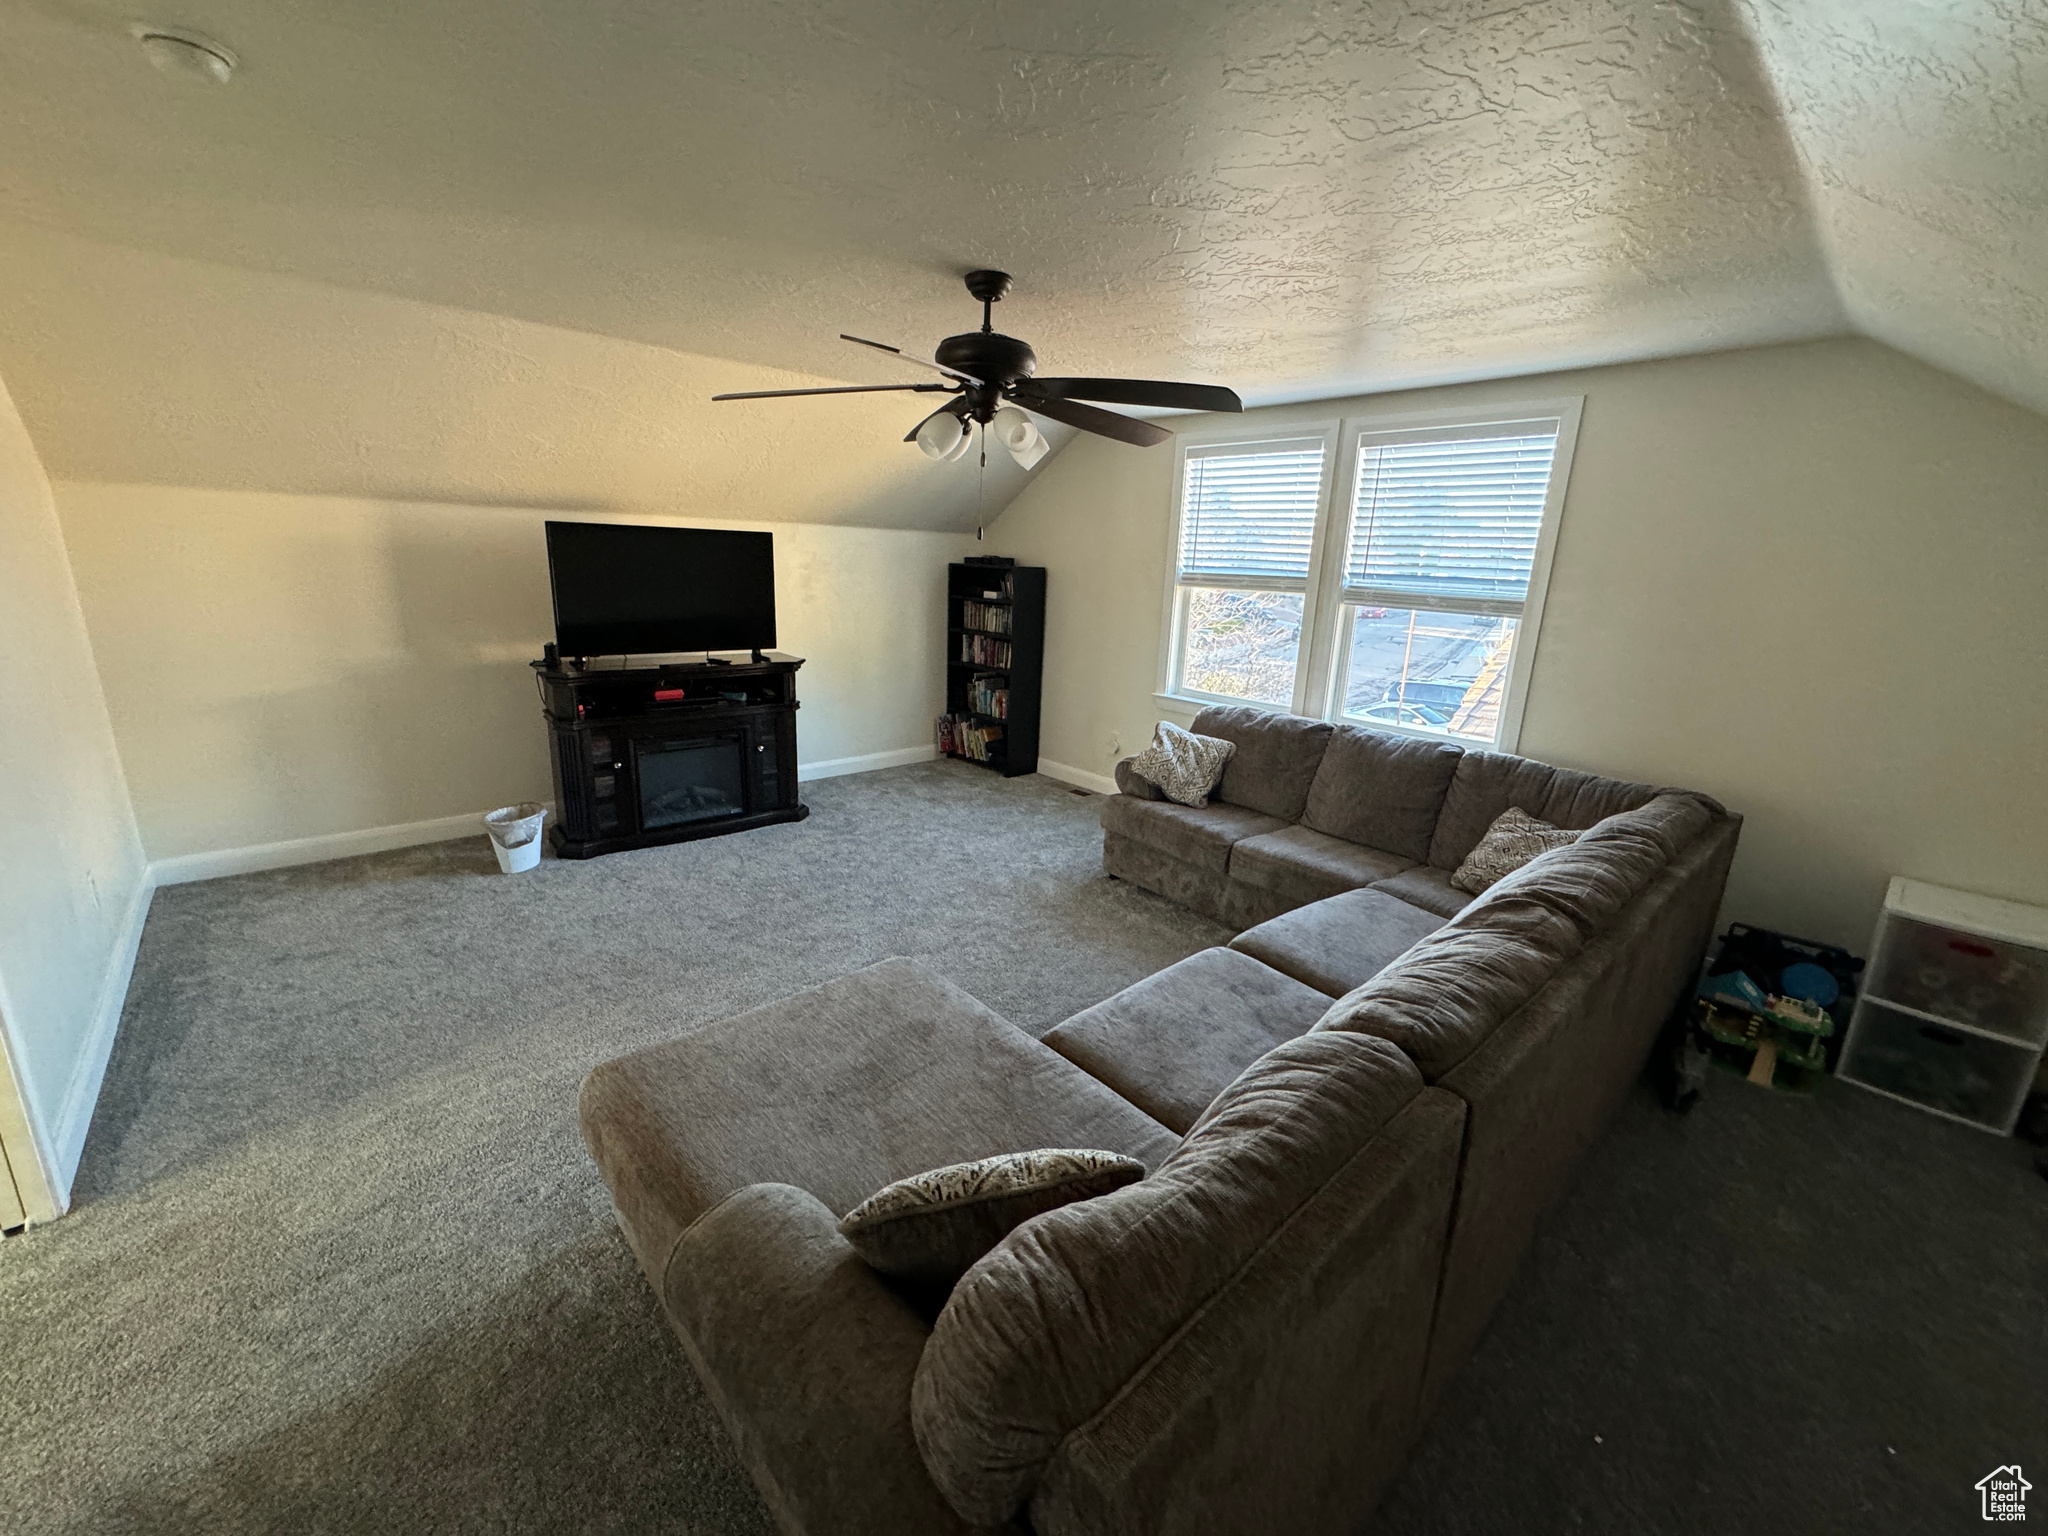 Living room with ceiling fan, a textured ceiling, and carpet